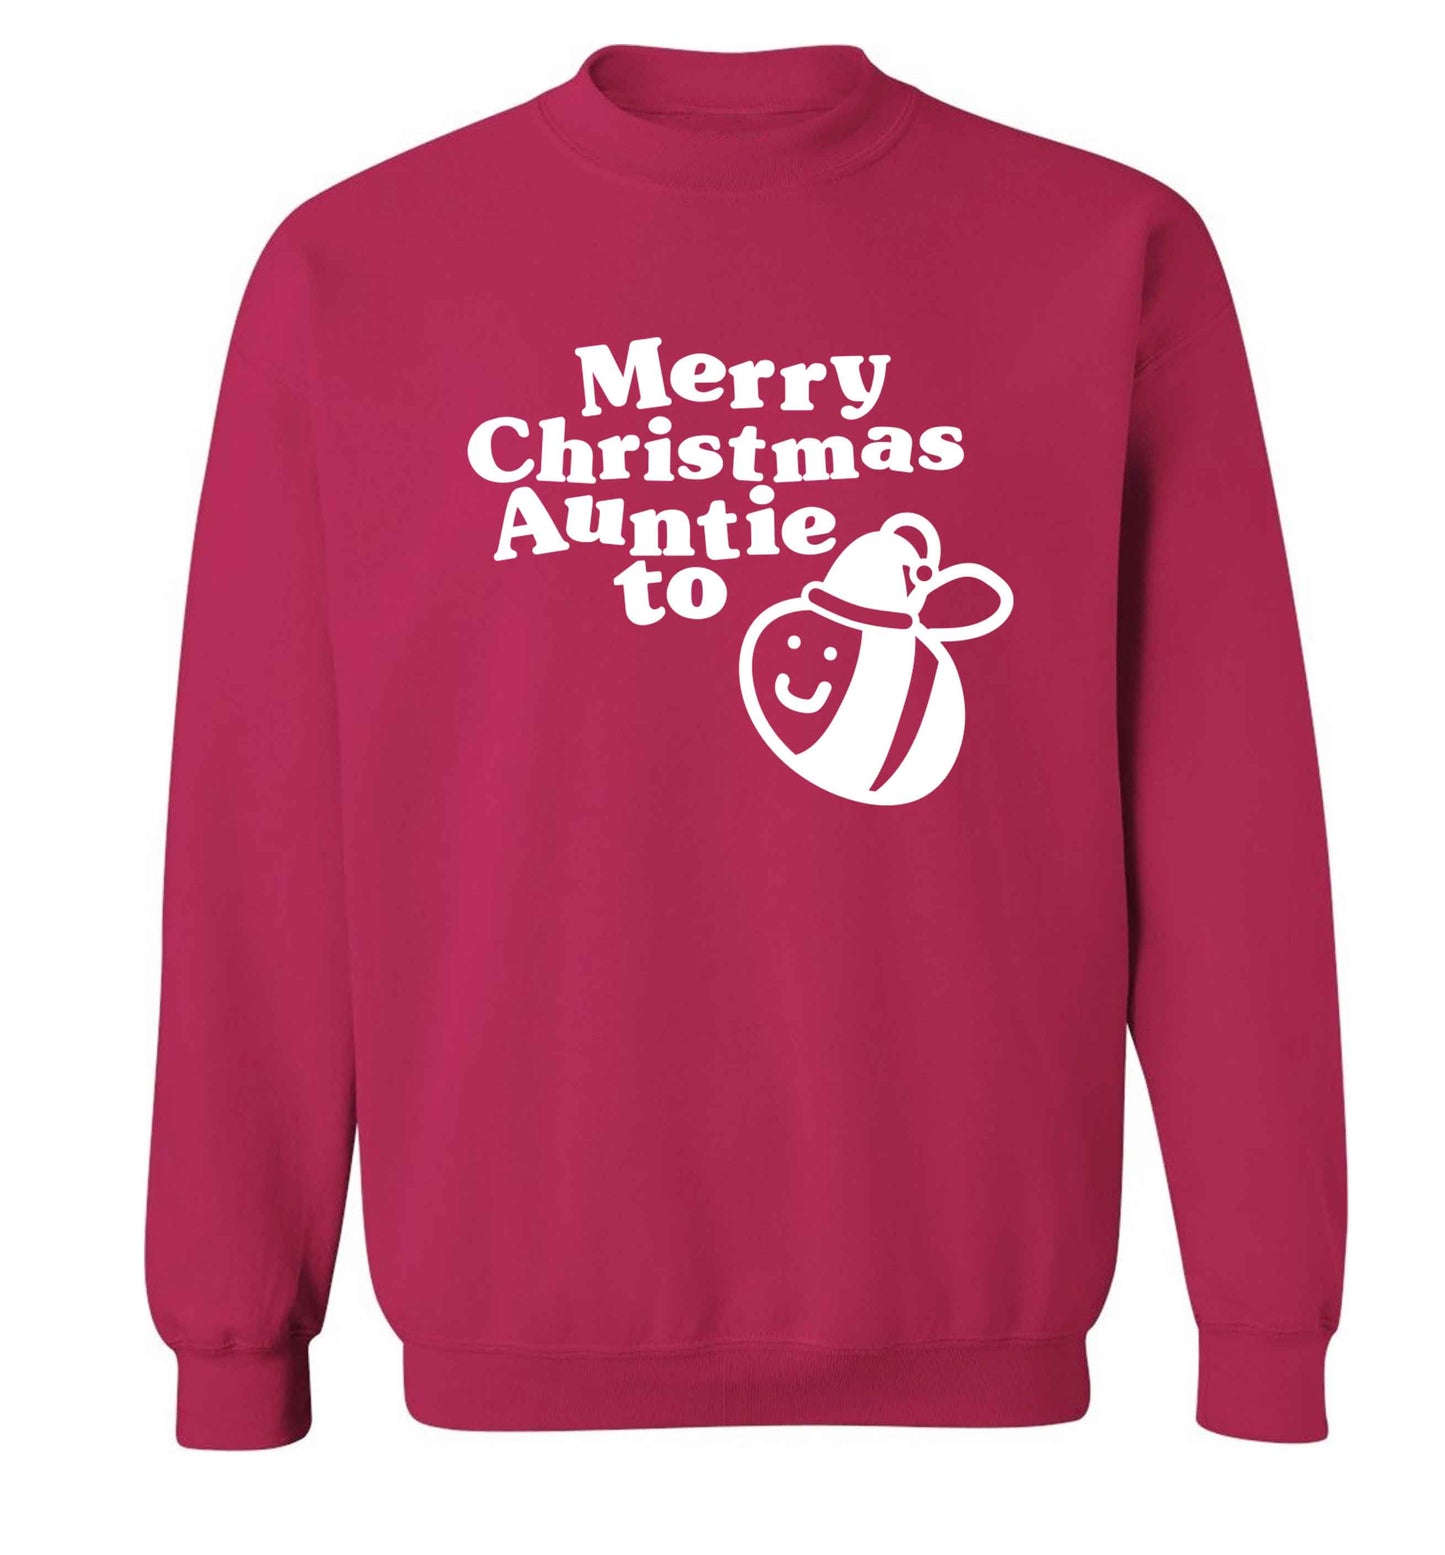 Merry Christmas auntie to be Adult's unisex pink Sweater 2XL